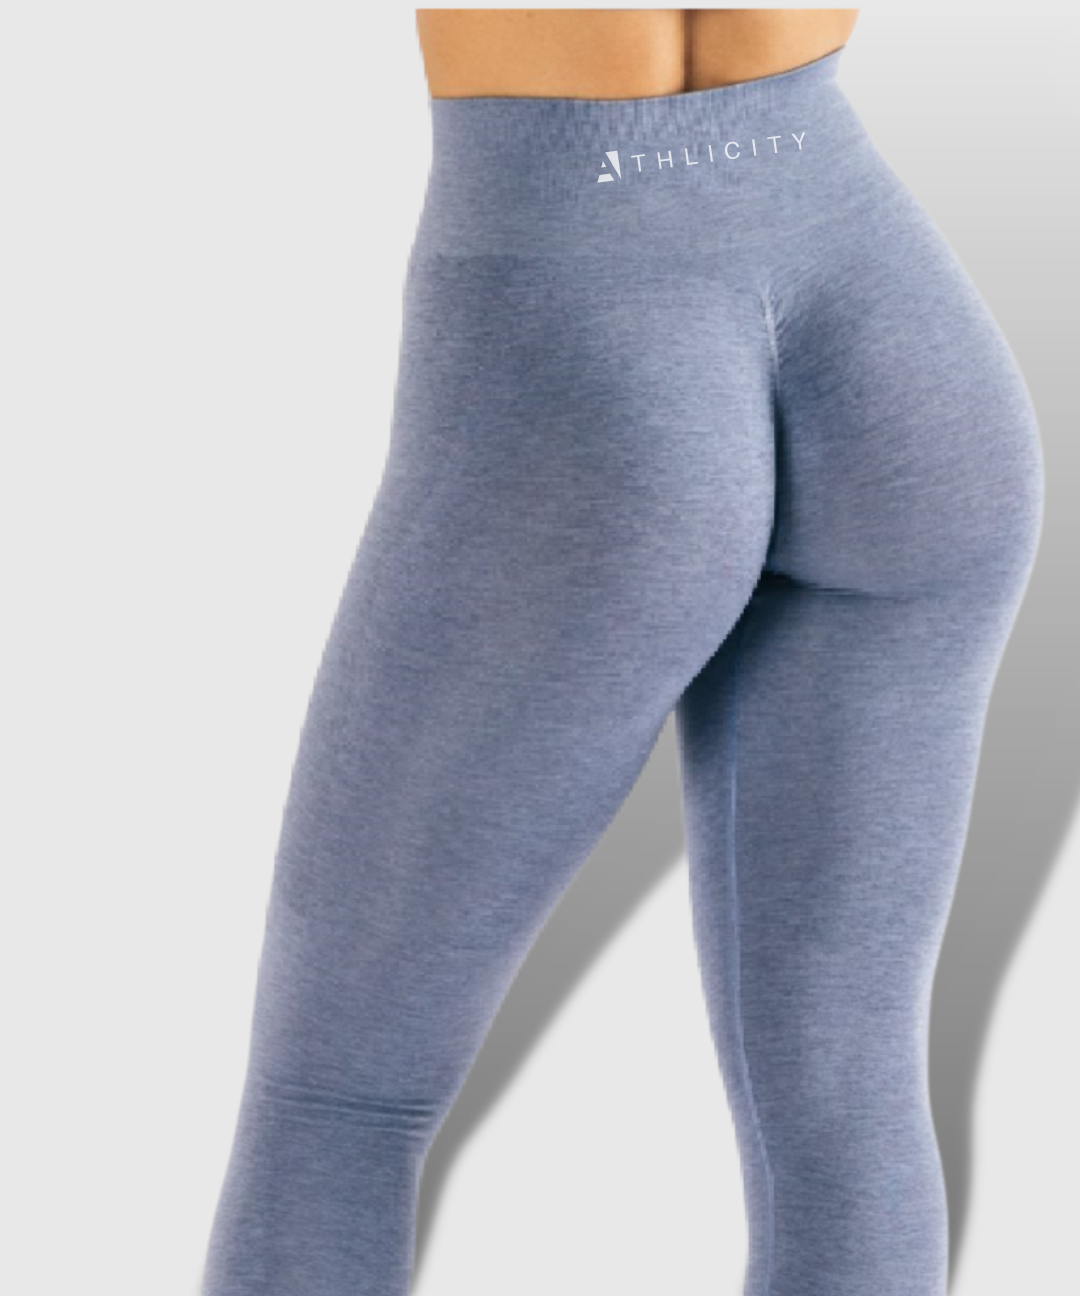 Alphalete Amplify Seamless Scrunch Leggings Size Small Sold Out Color Teal